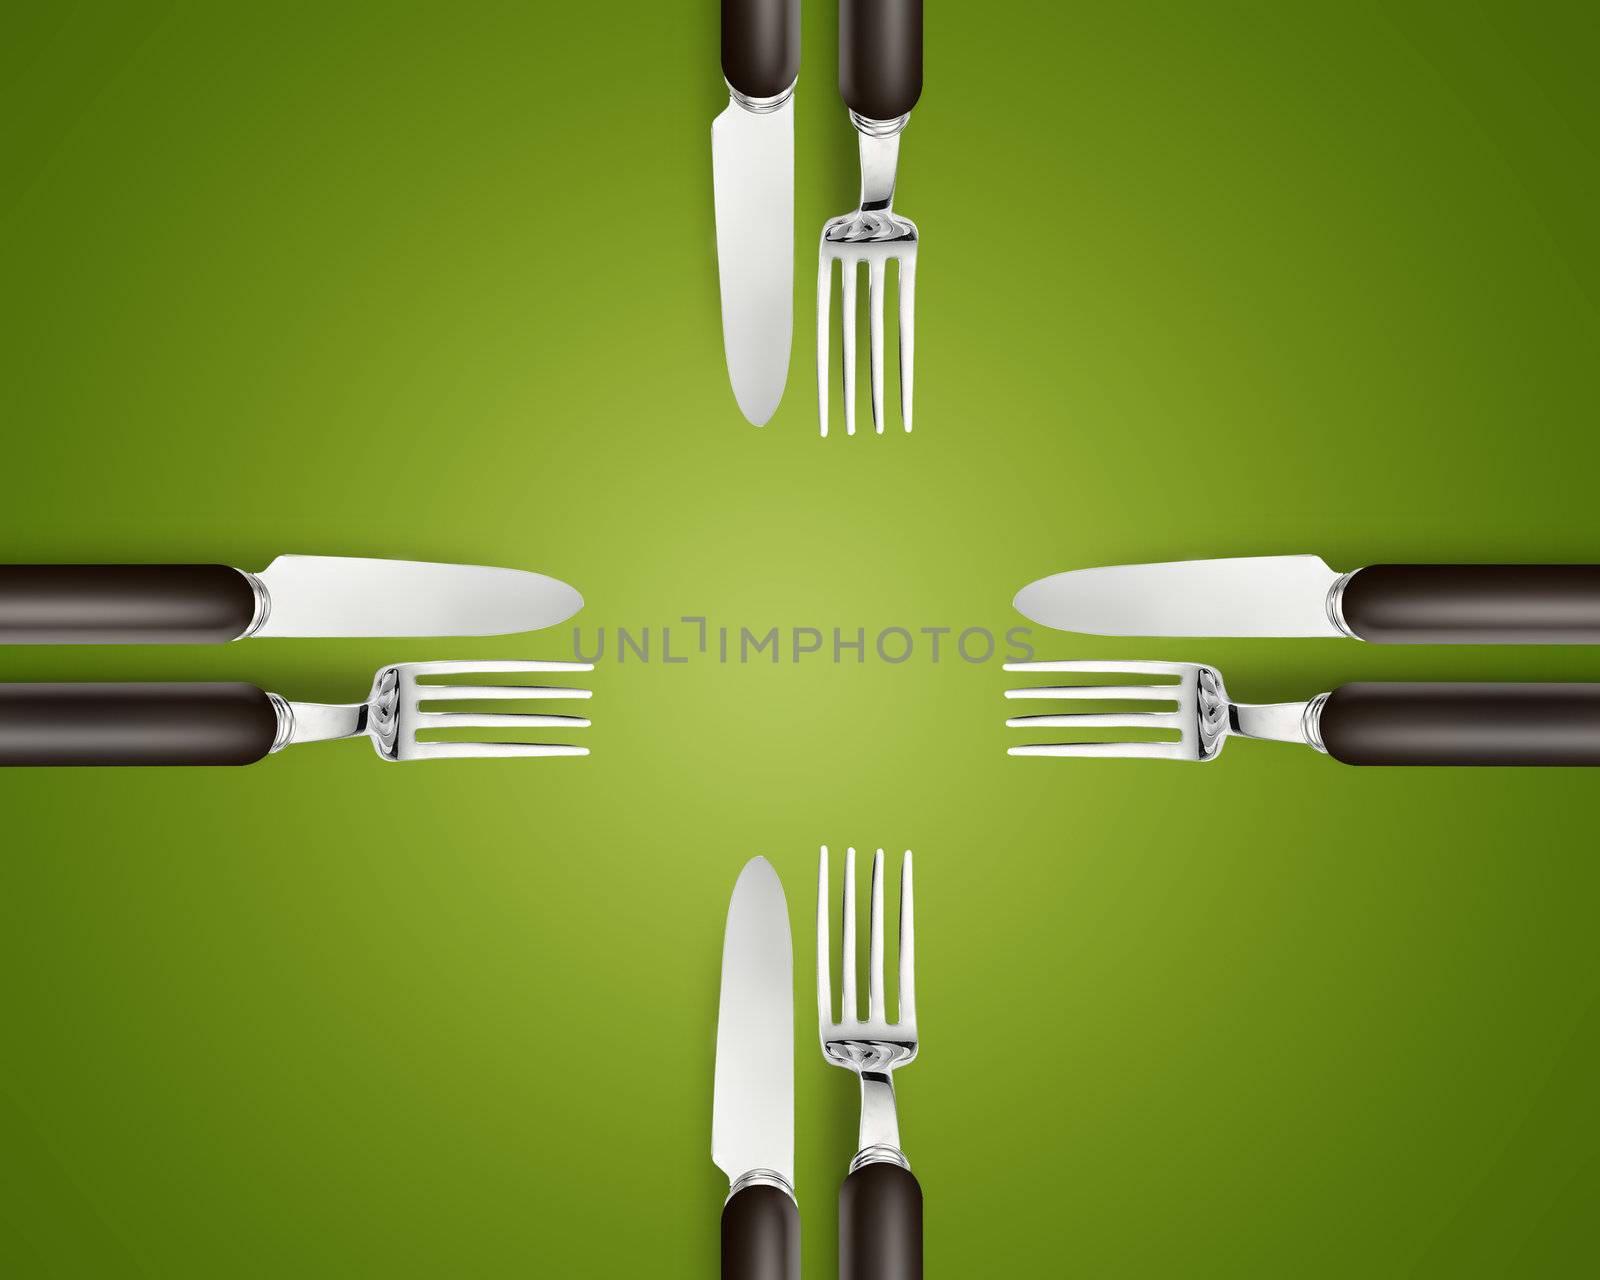 Empty copy space circle in set of knives and forks by designsstock